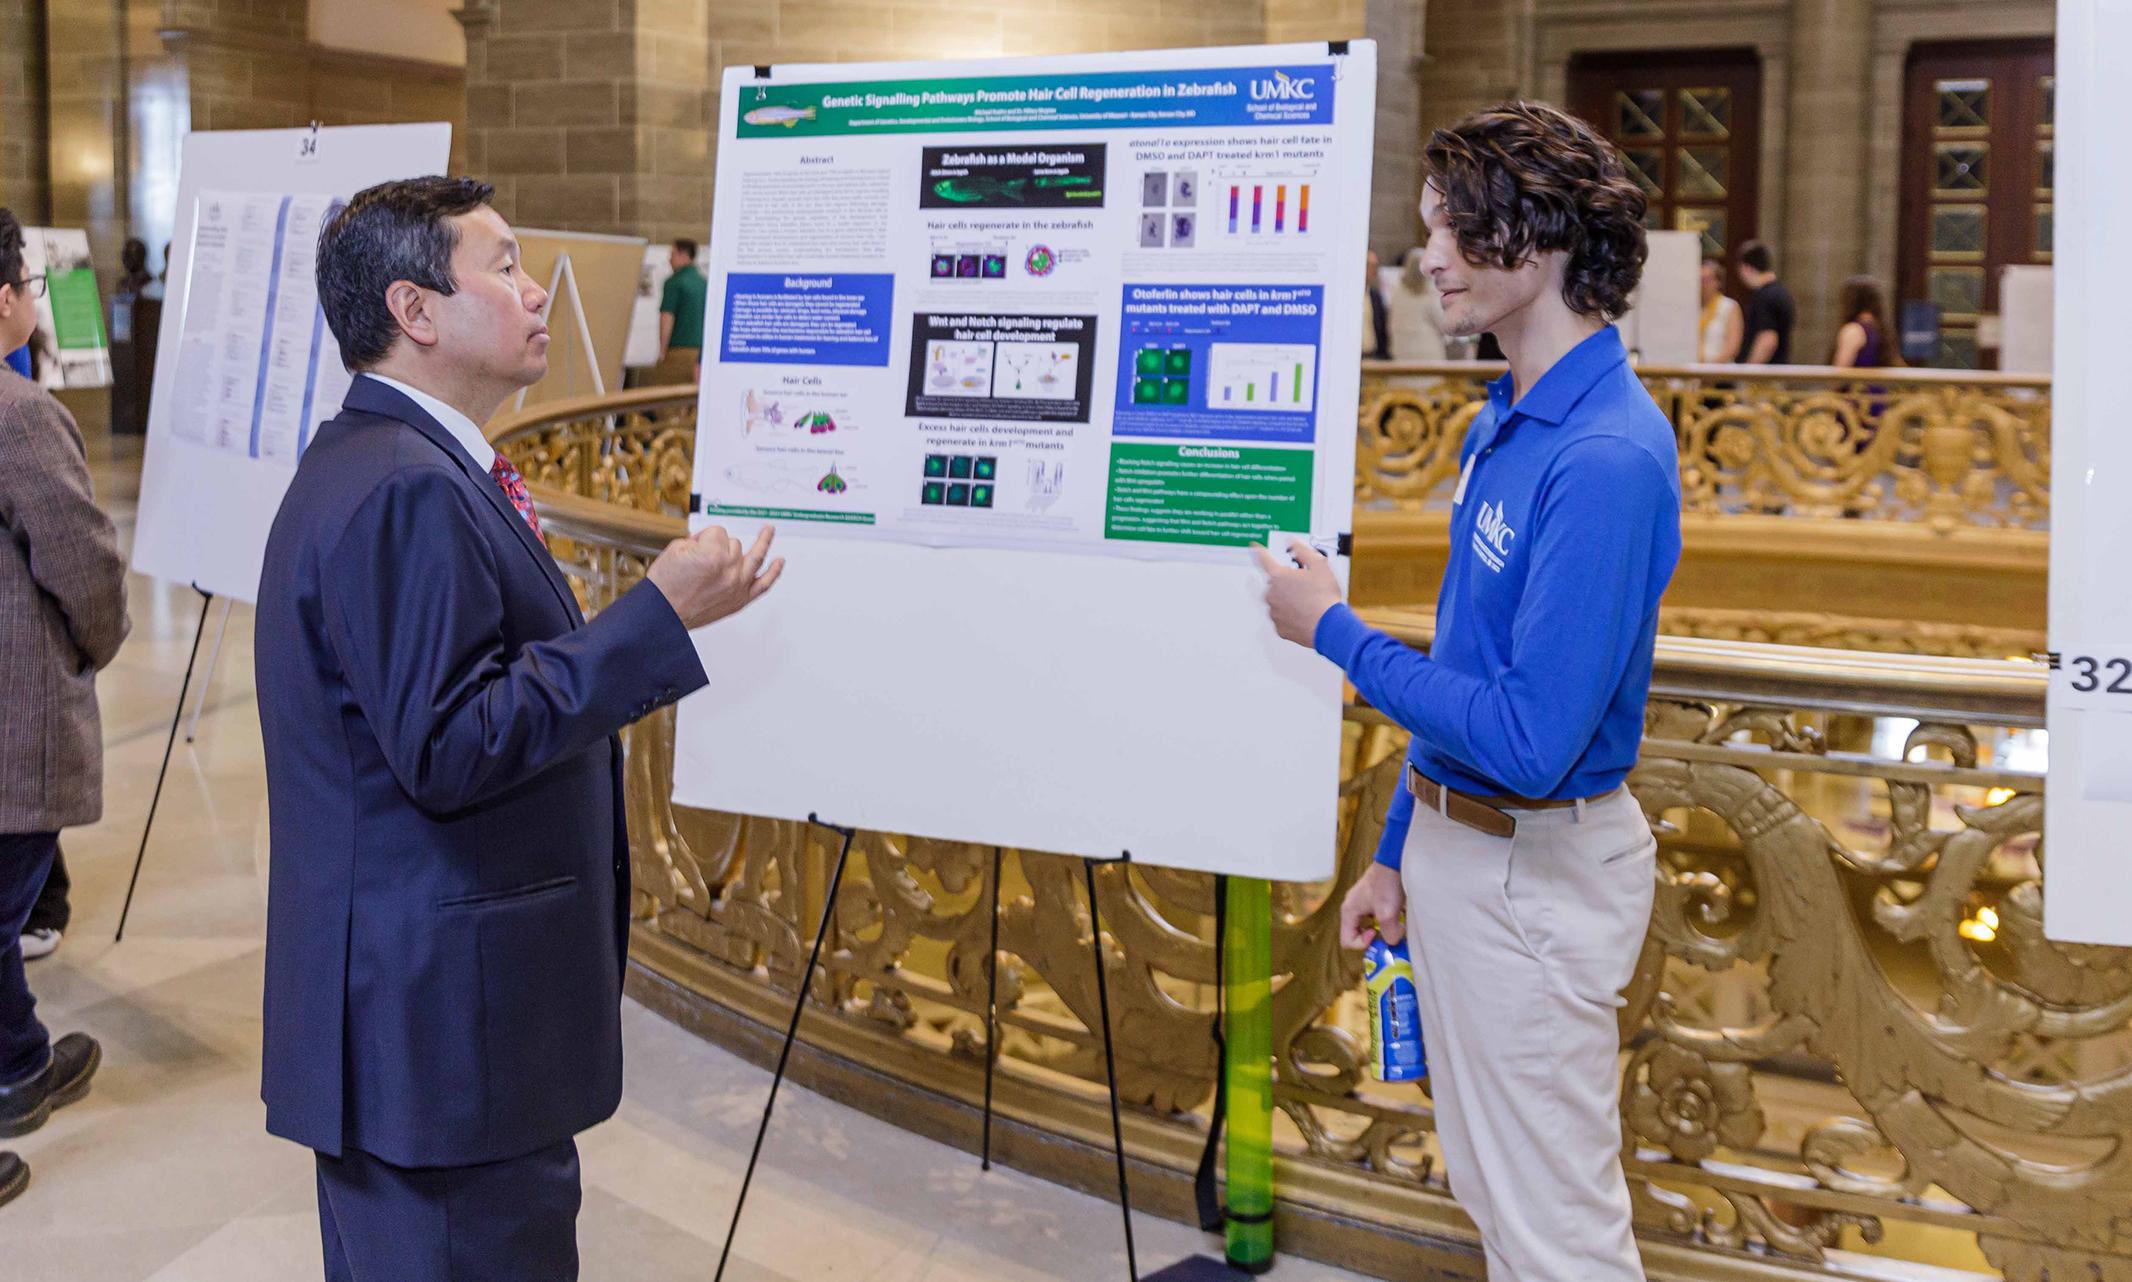 President Mun Y. Choi and UMKC student Michael Kuehn at a poster board